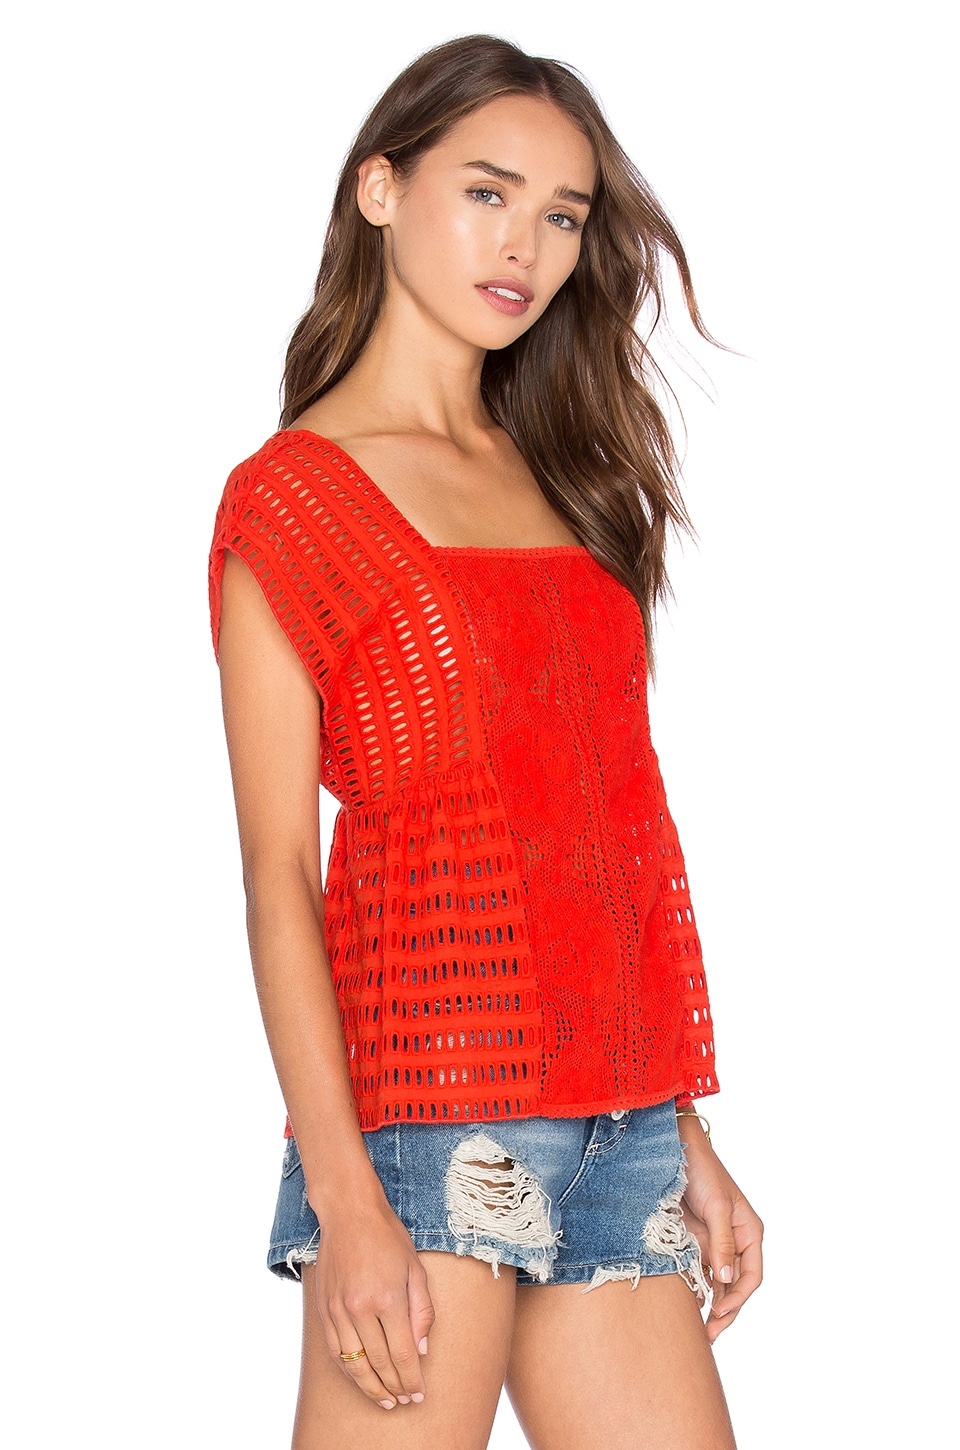 SAYLOR Gala Top in Fire | REVOLVE